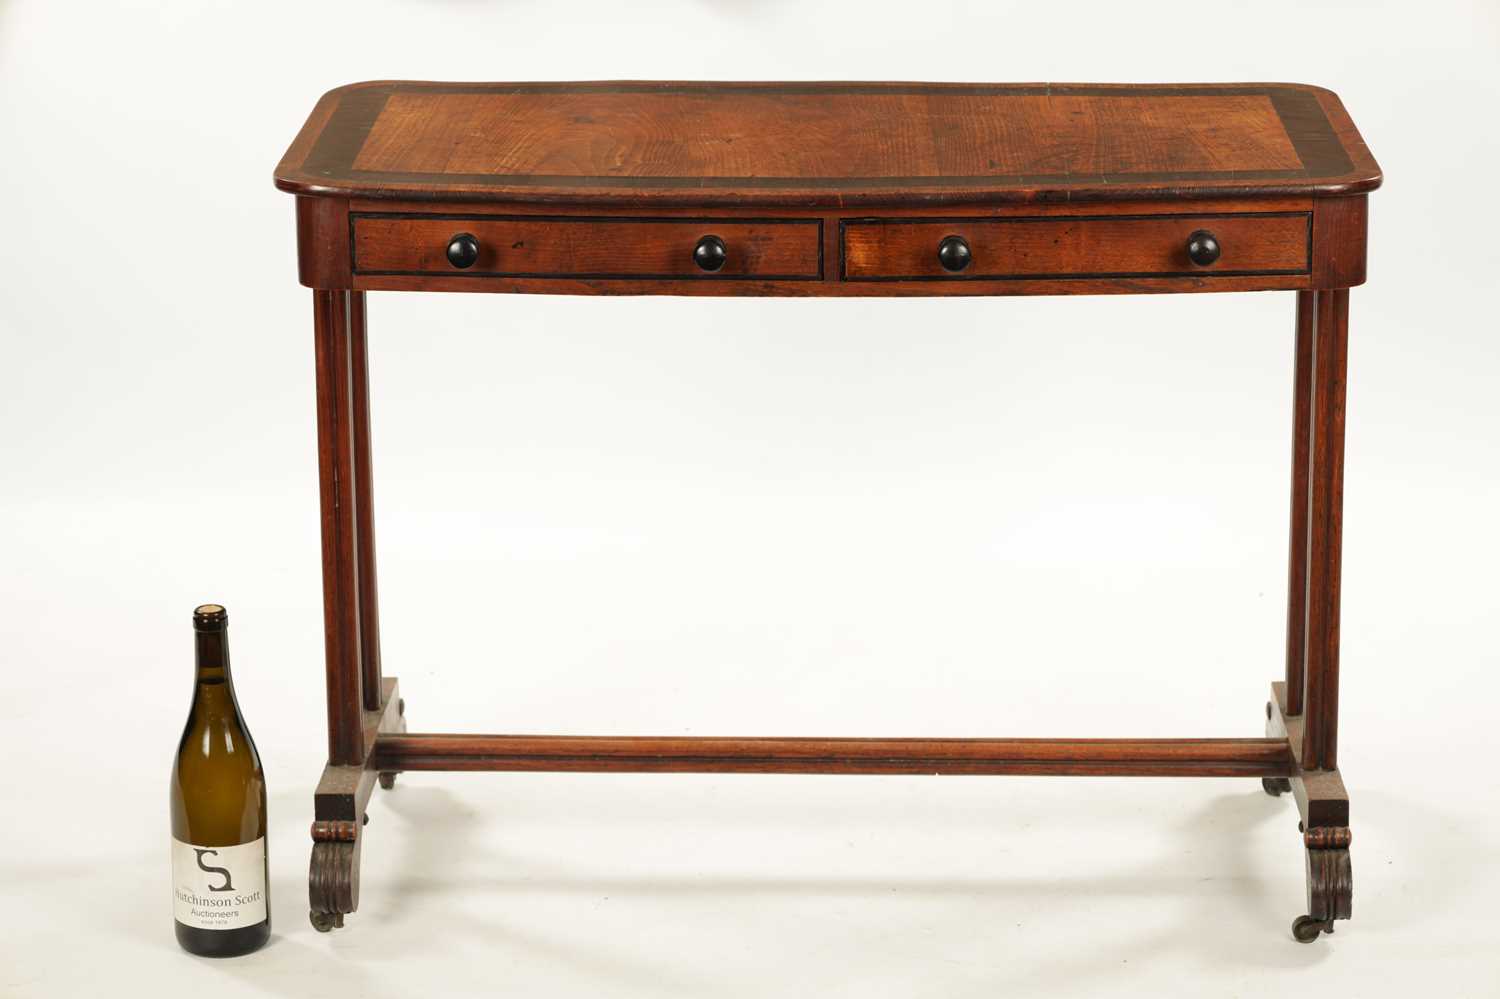 A RARE CANADIAN REGENCY PERIOD ASH AND COROMANDEL SIDE TABLE - Image 4 of 9